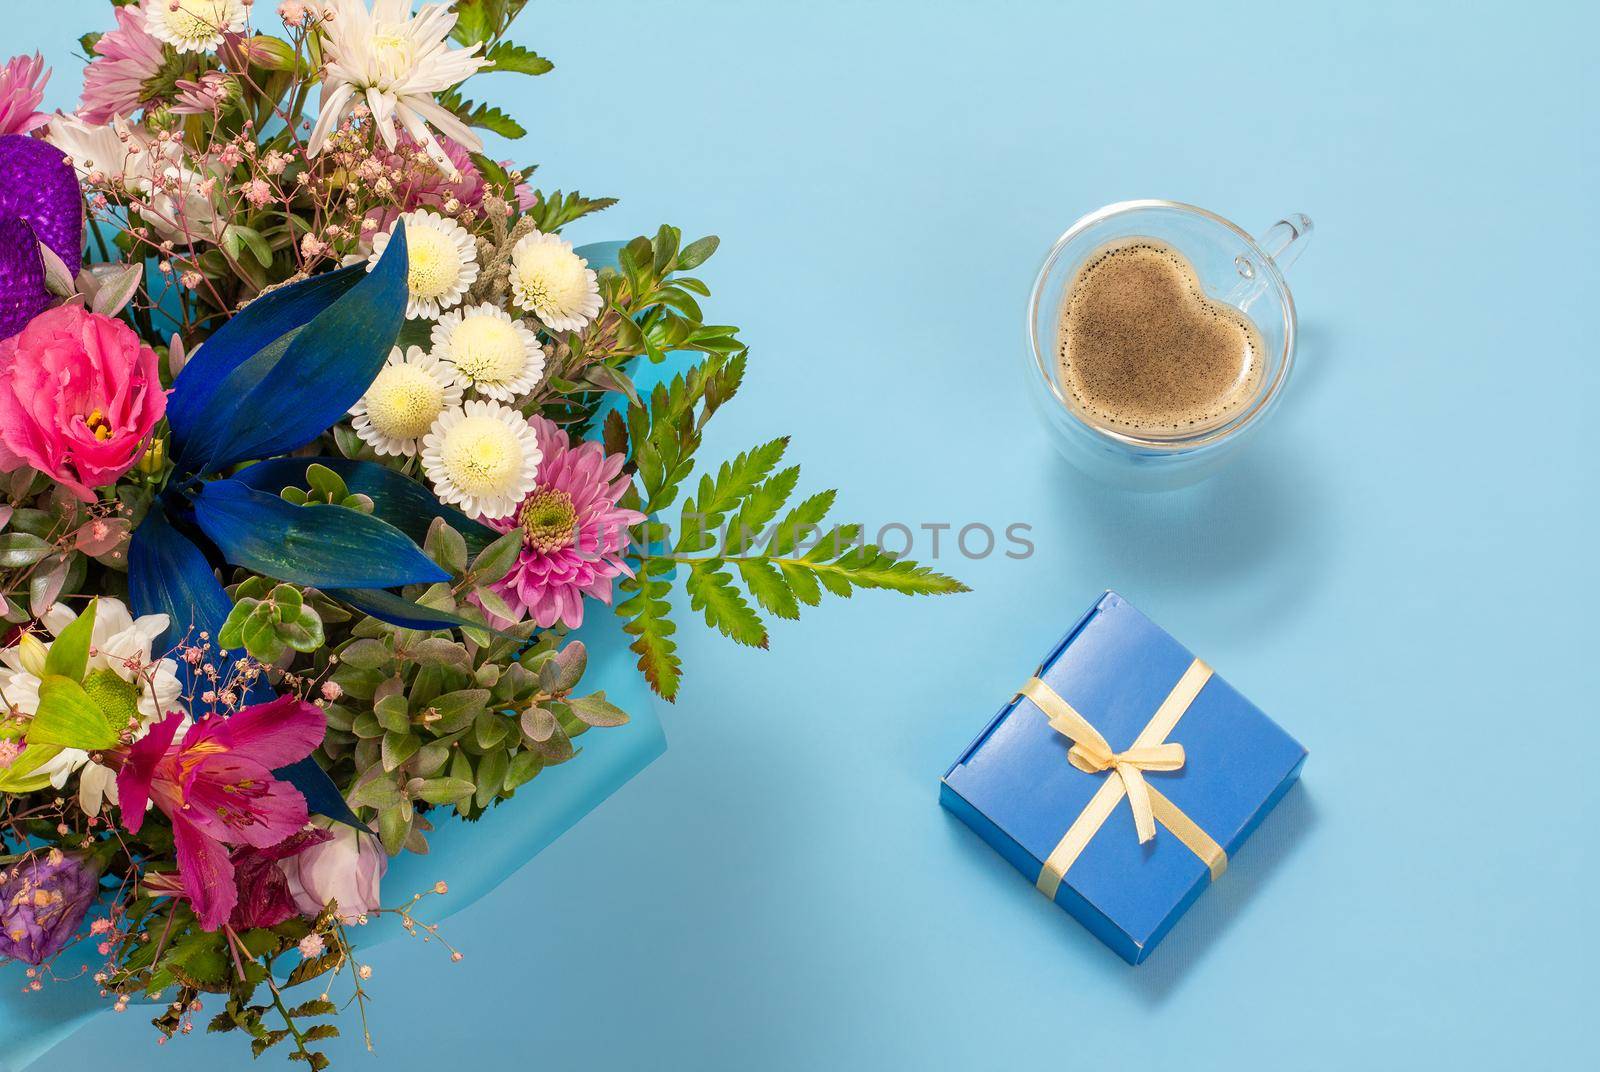 Cup of coffee, a gift box and flowers on the blue background. Top view.